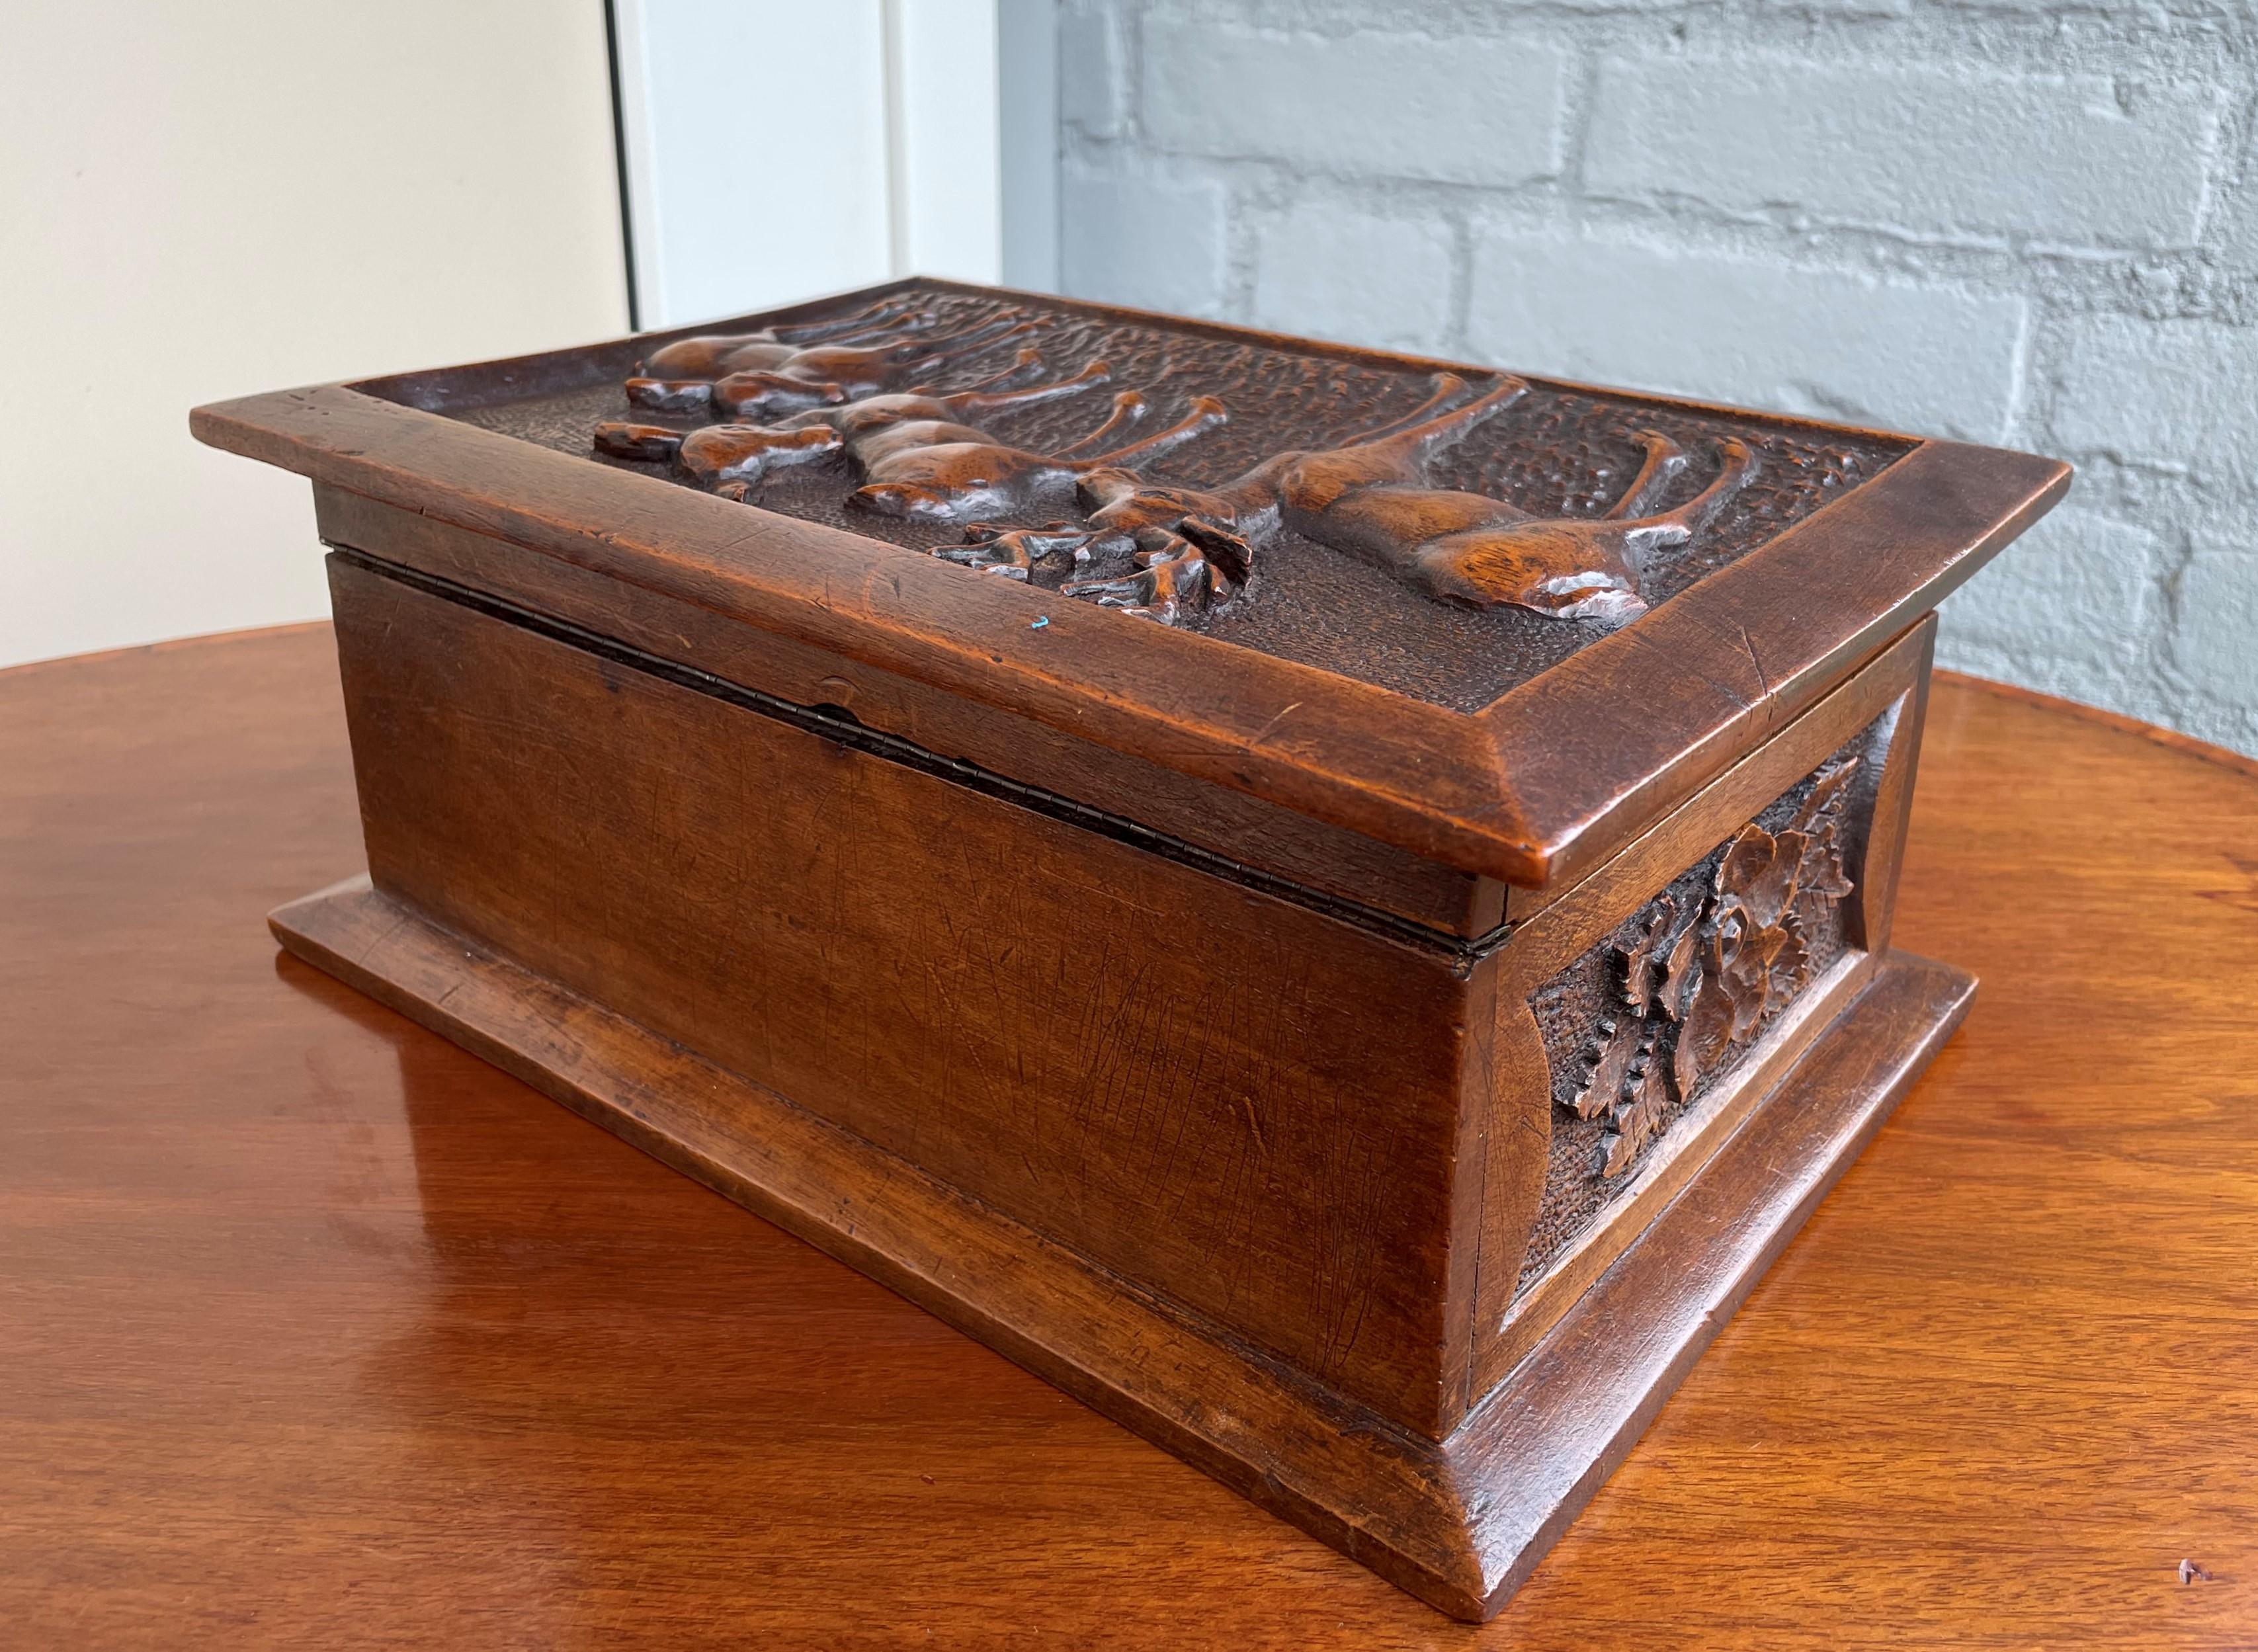 Stunning Arts & Crafts Box with Hand Carved Deer Sculptures in Deep Relief, 1910 5